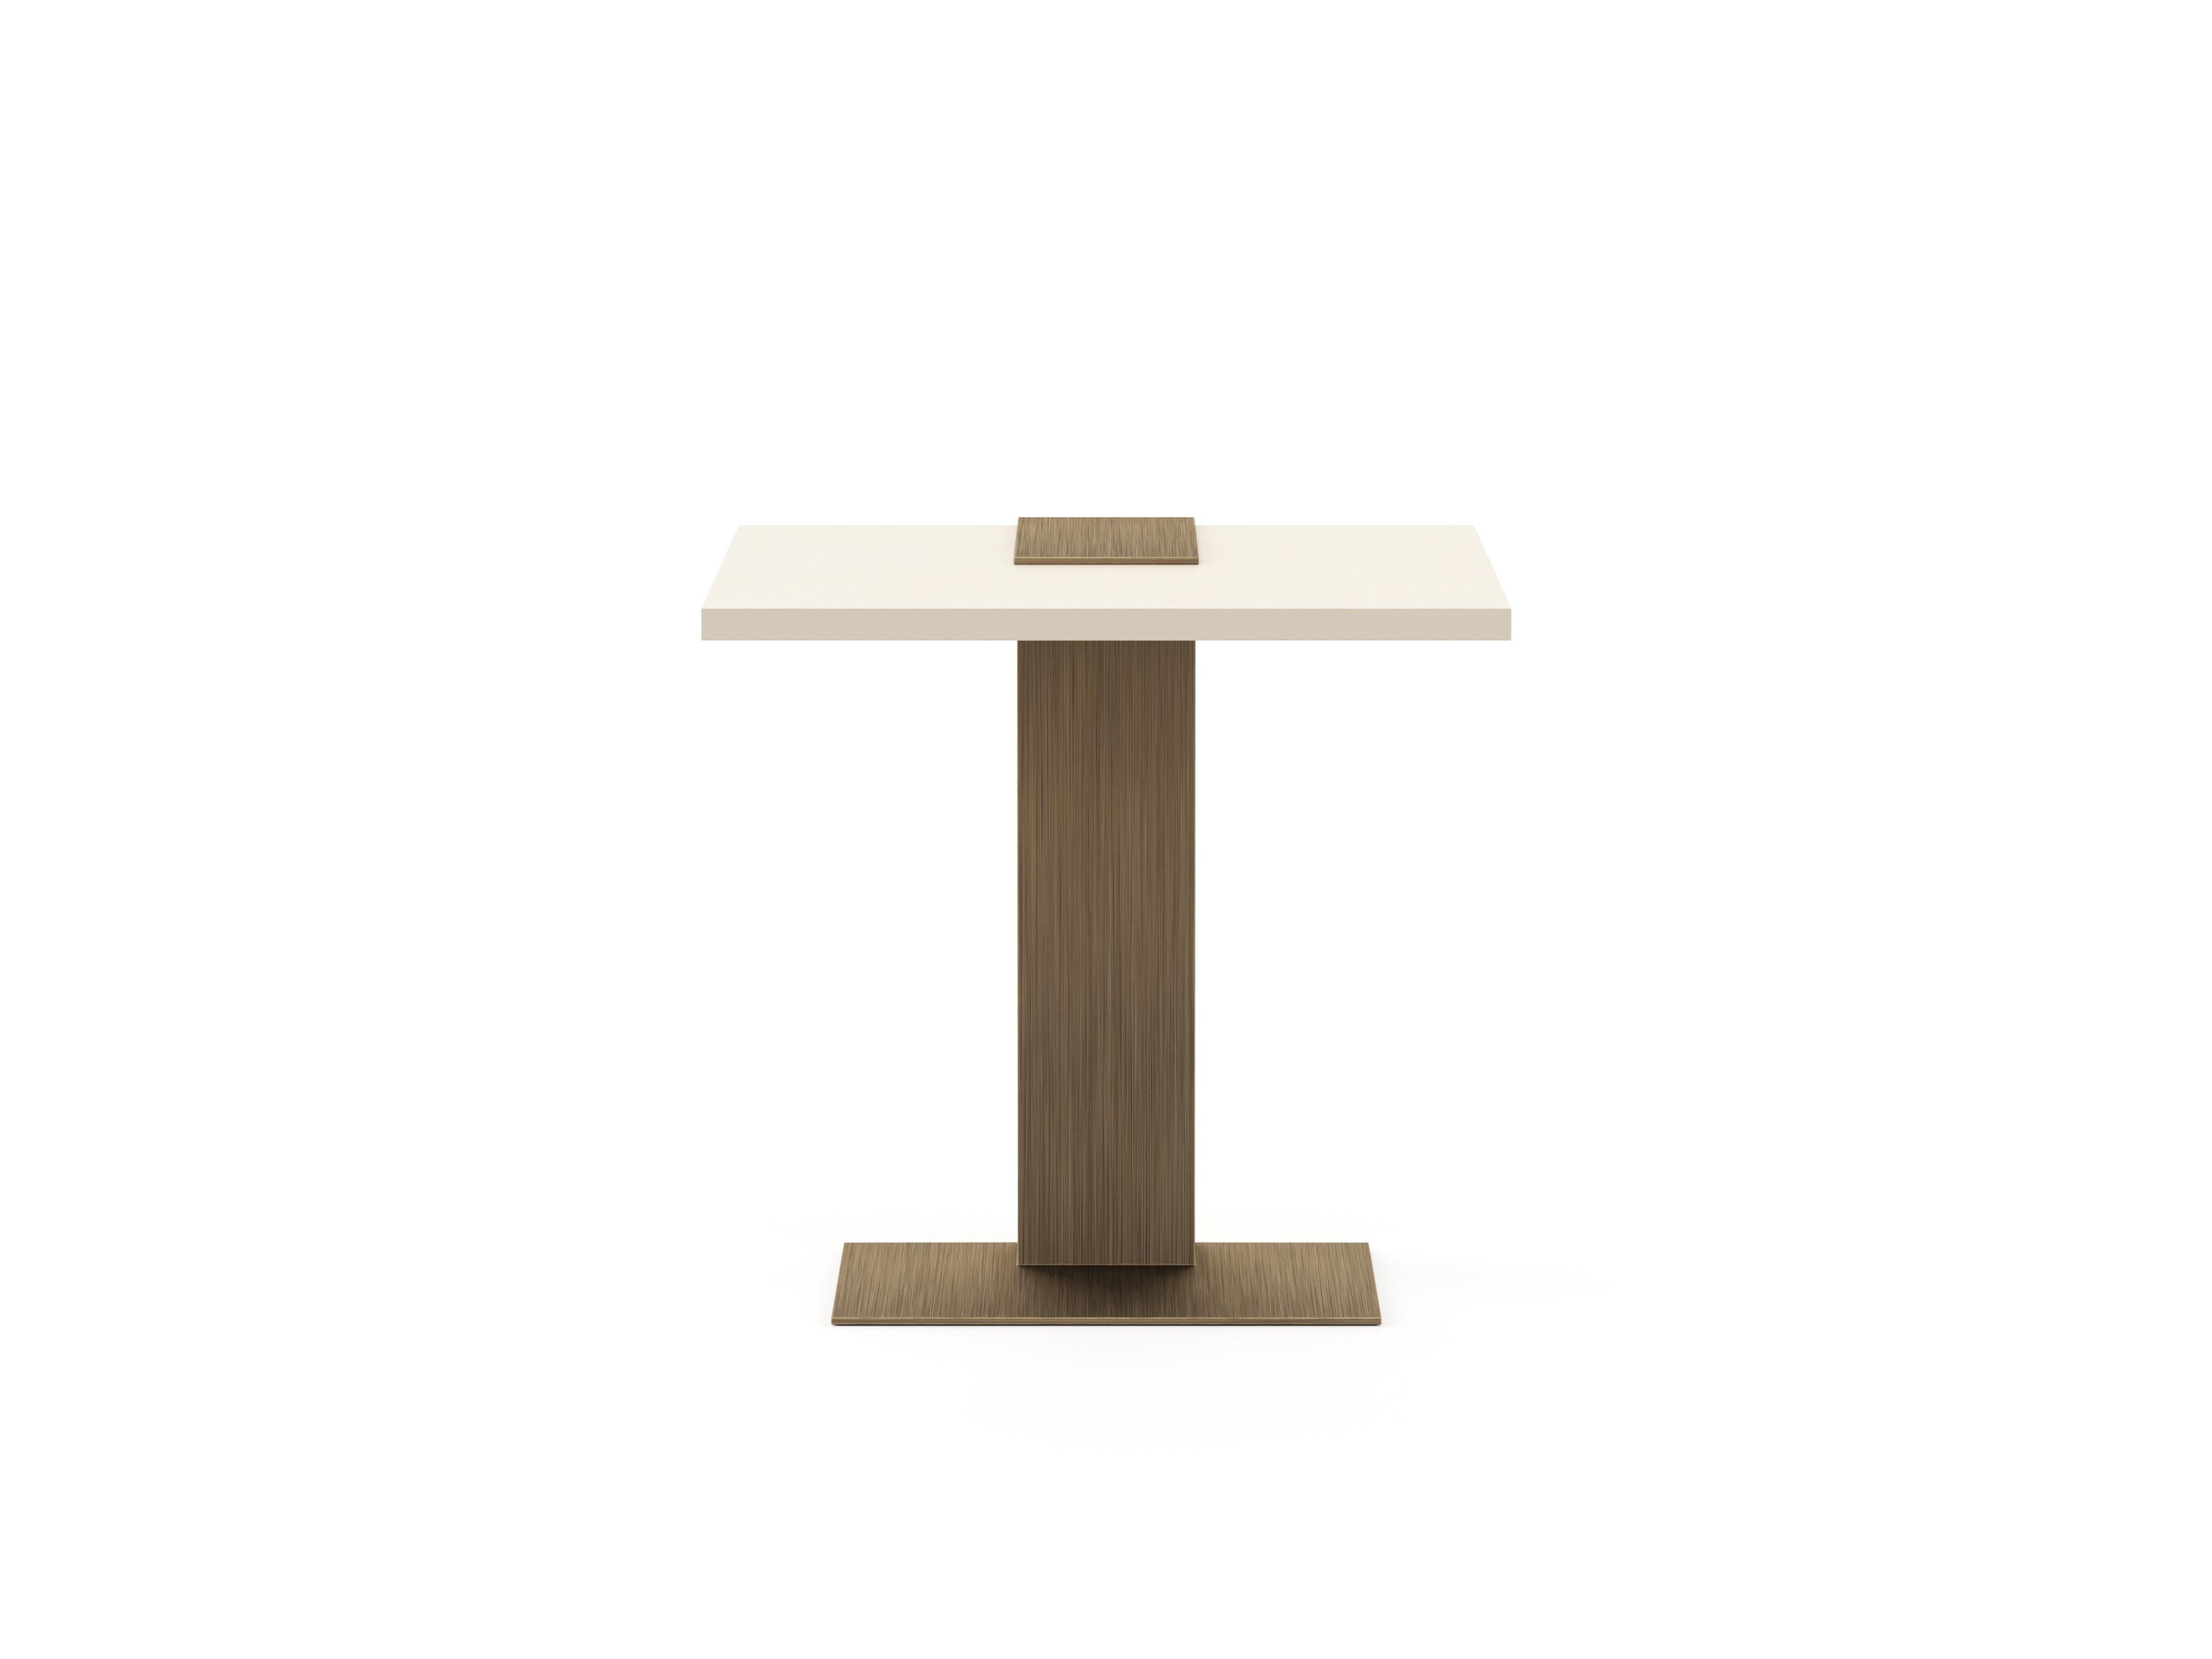 The Slender collection was developed with slim and elongated lines. The traces of this collection extend along the pieces, creating a sense of involvement between all the elements.

With an elegant matte walnut base, the Slender side table